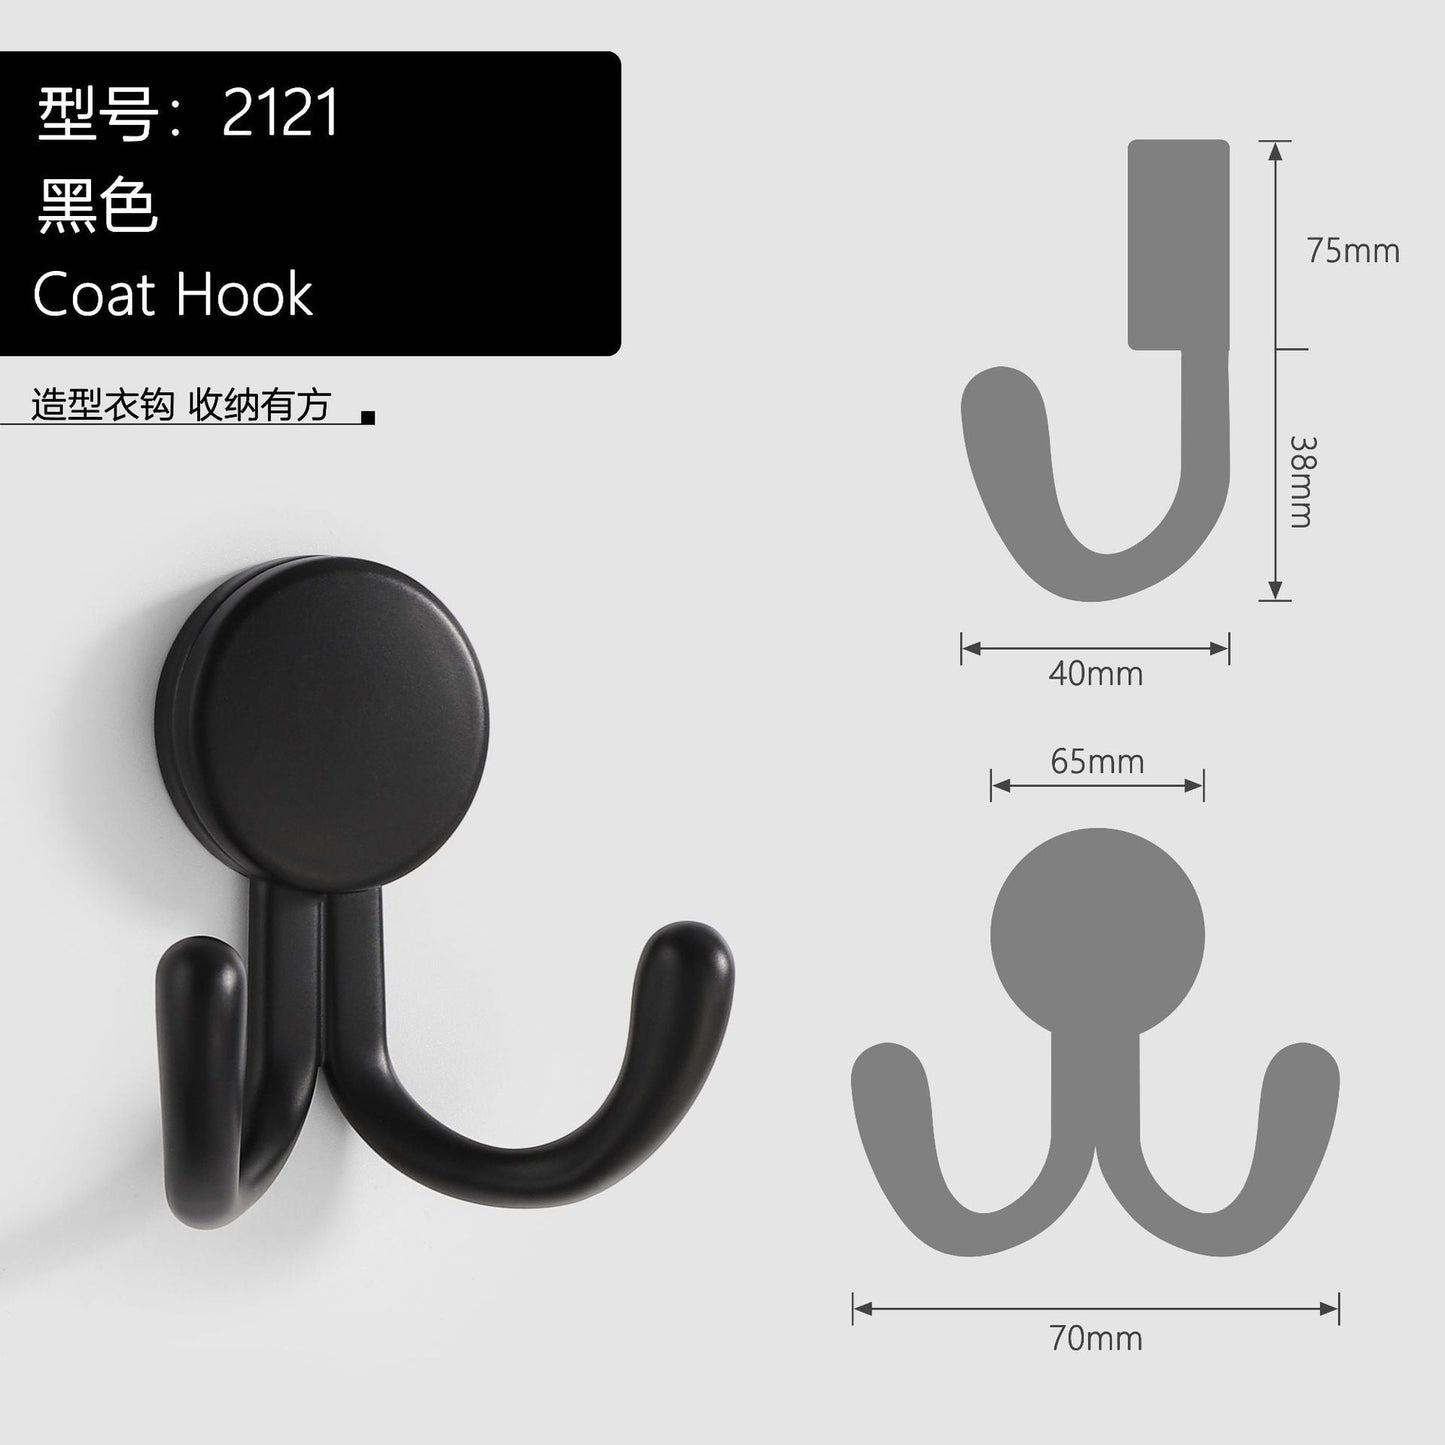 YUTOKO Antler Hook Key Hanger Multifunctional Hanging Hook Wall Decoration Holder For Kitchen And Bathroom Home Accessories